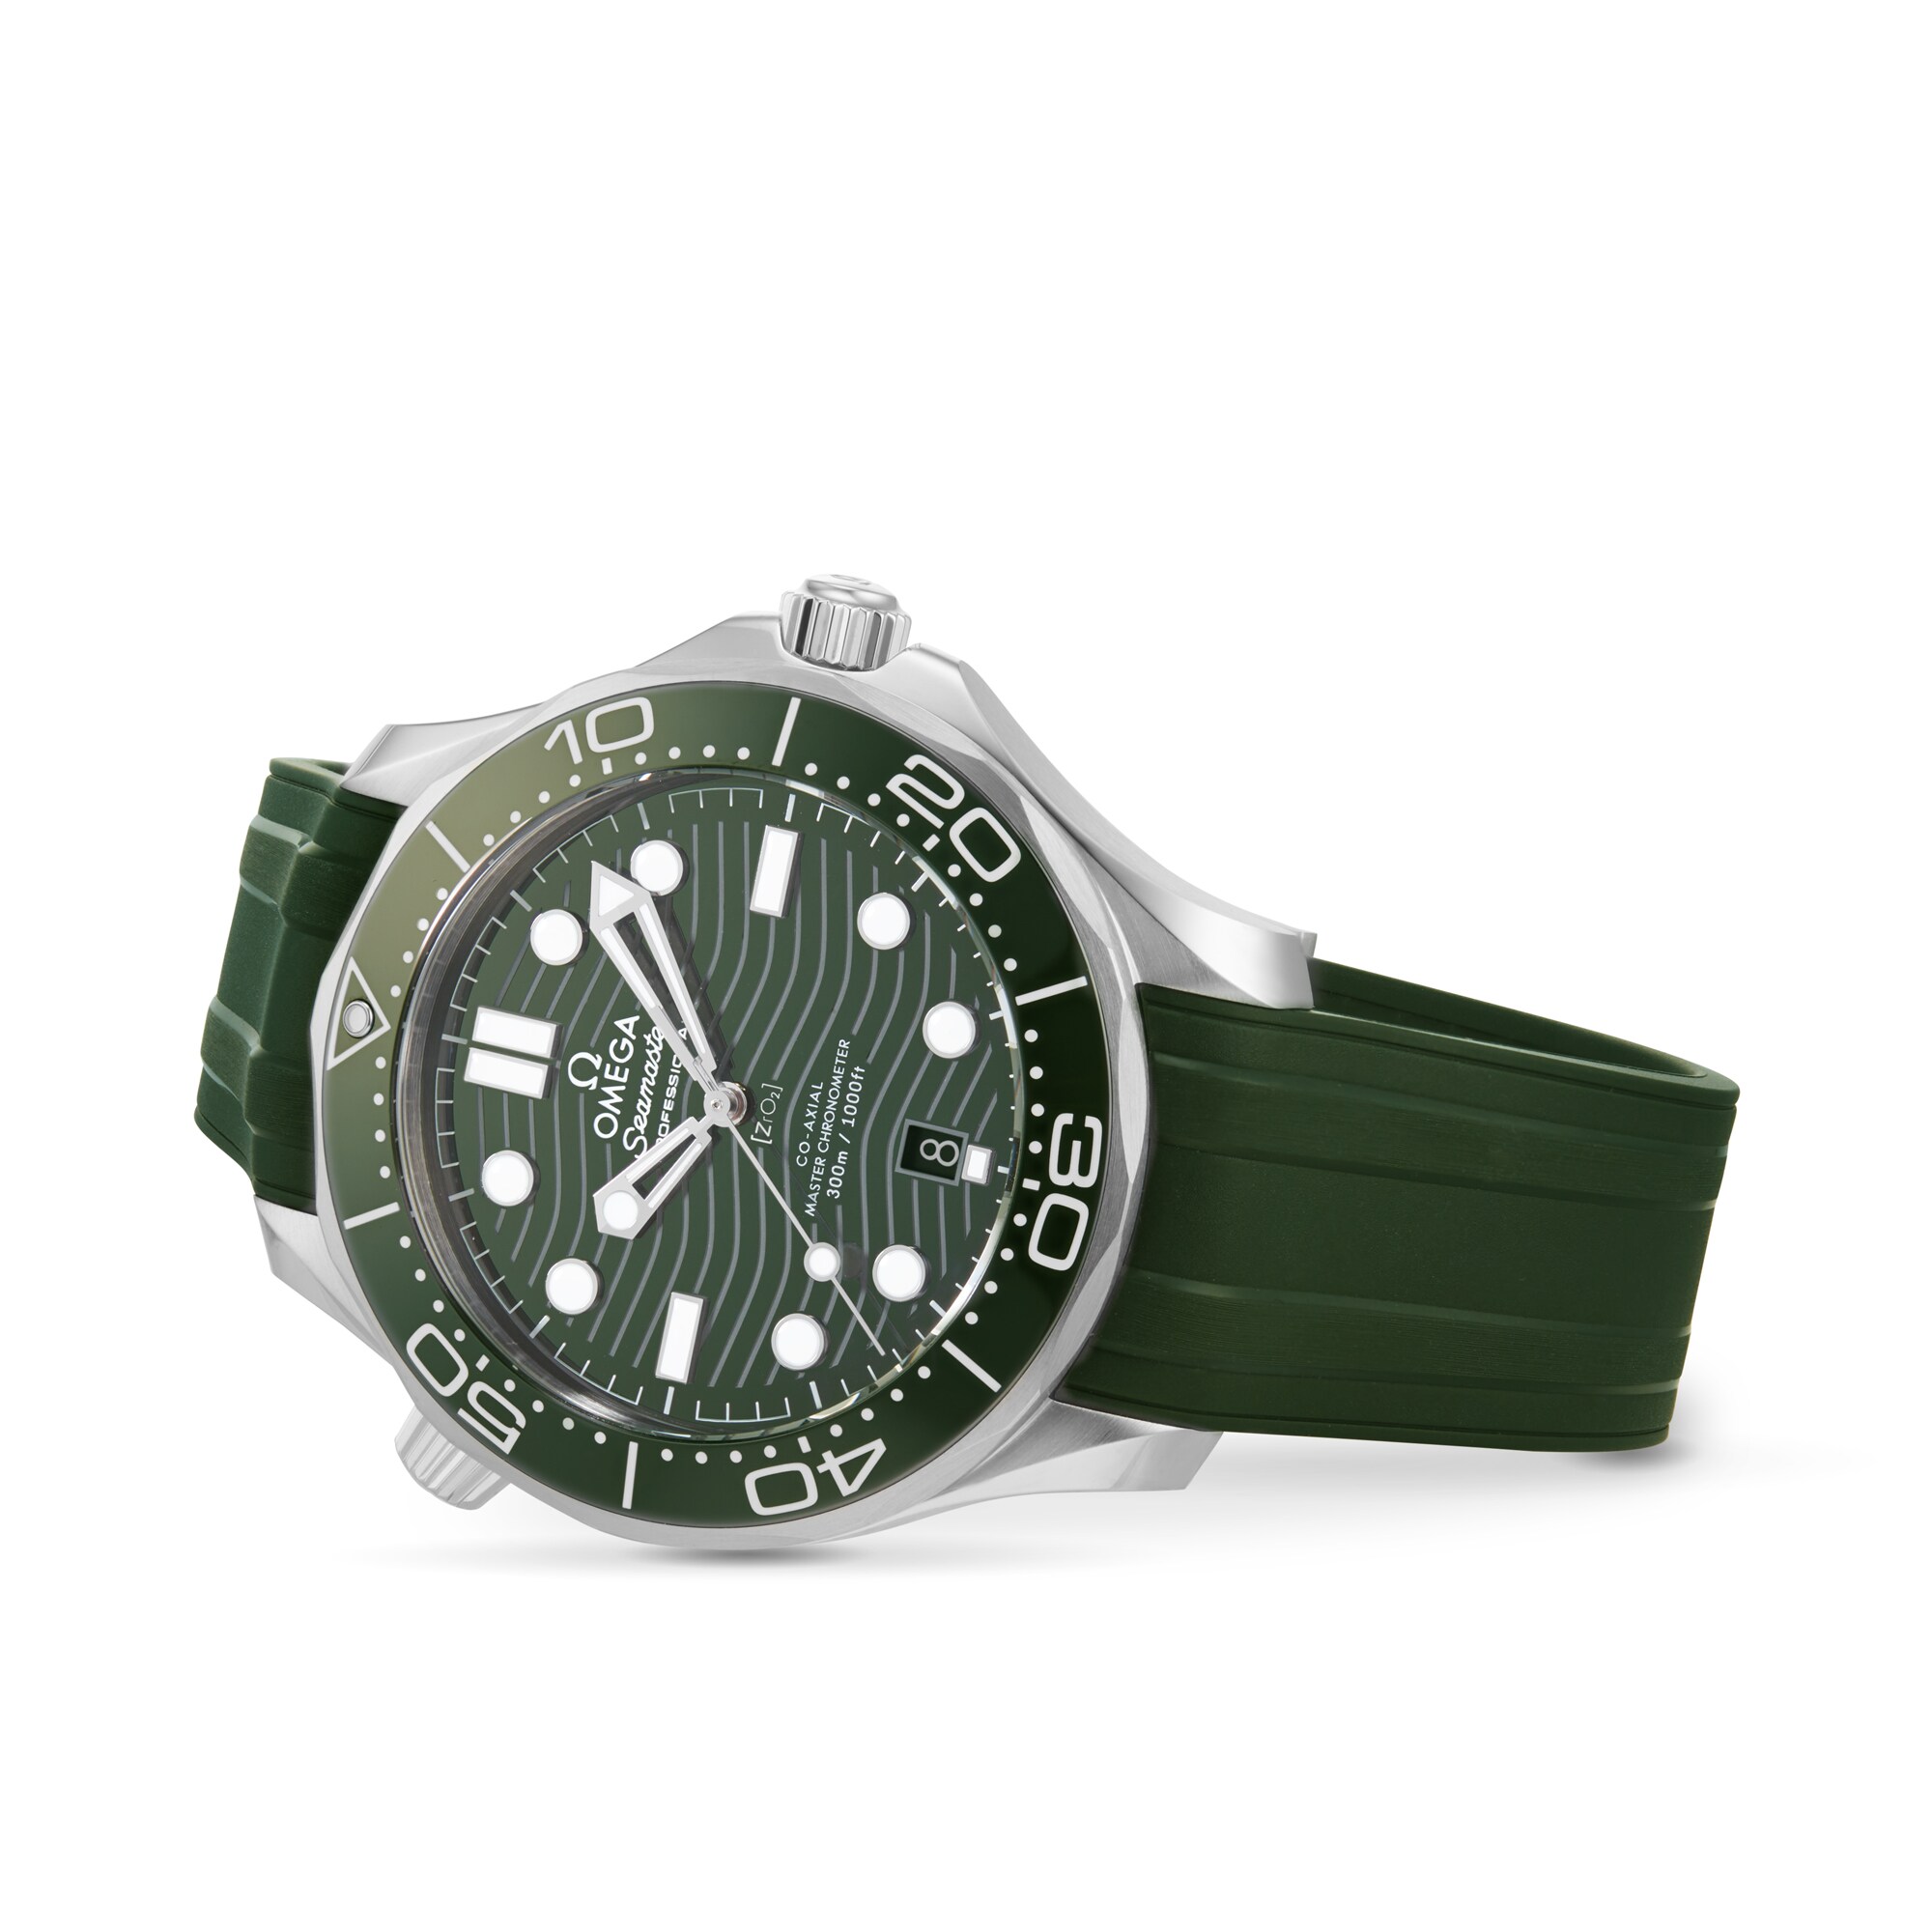 Seamaster Diver 300m Co-Axial Master Chronometer 42mm Mens Watch Green